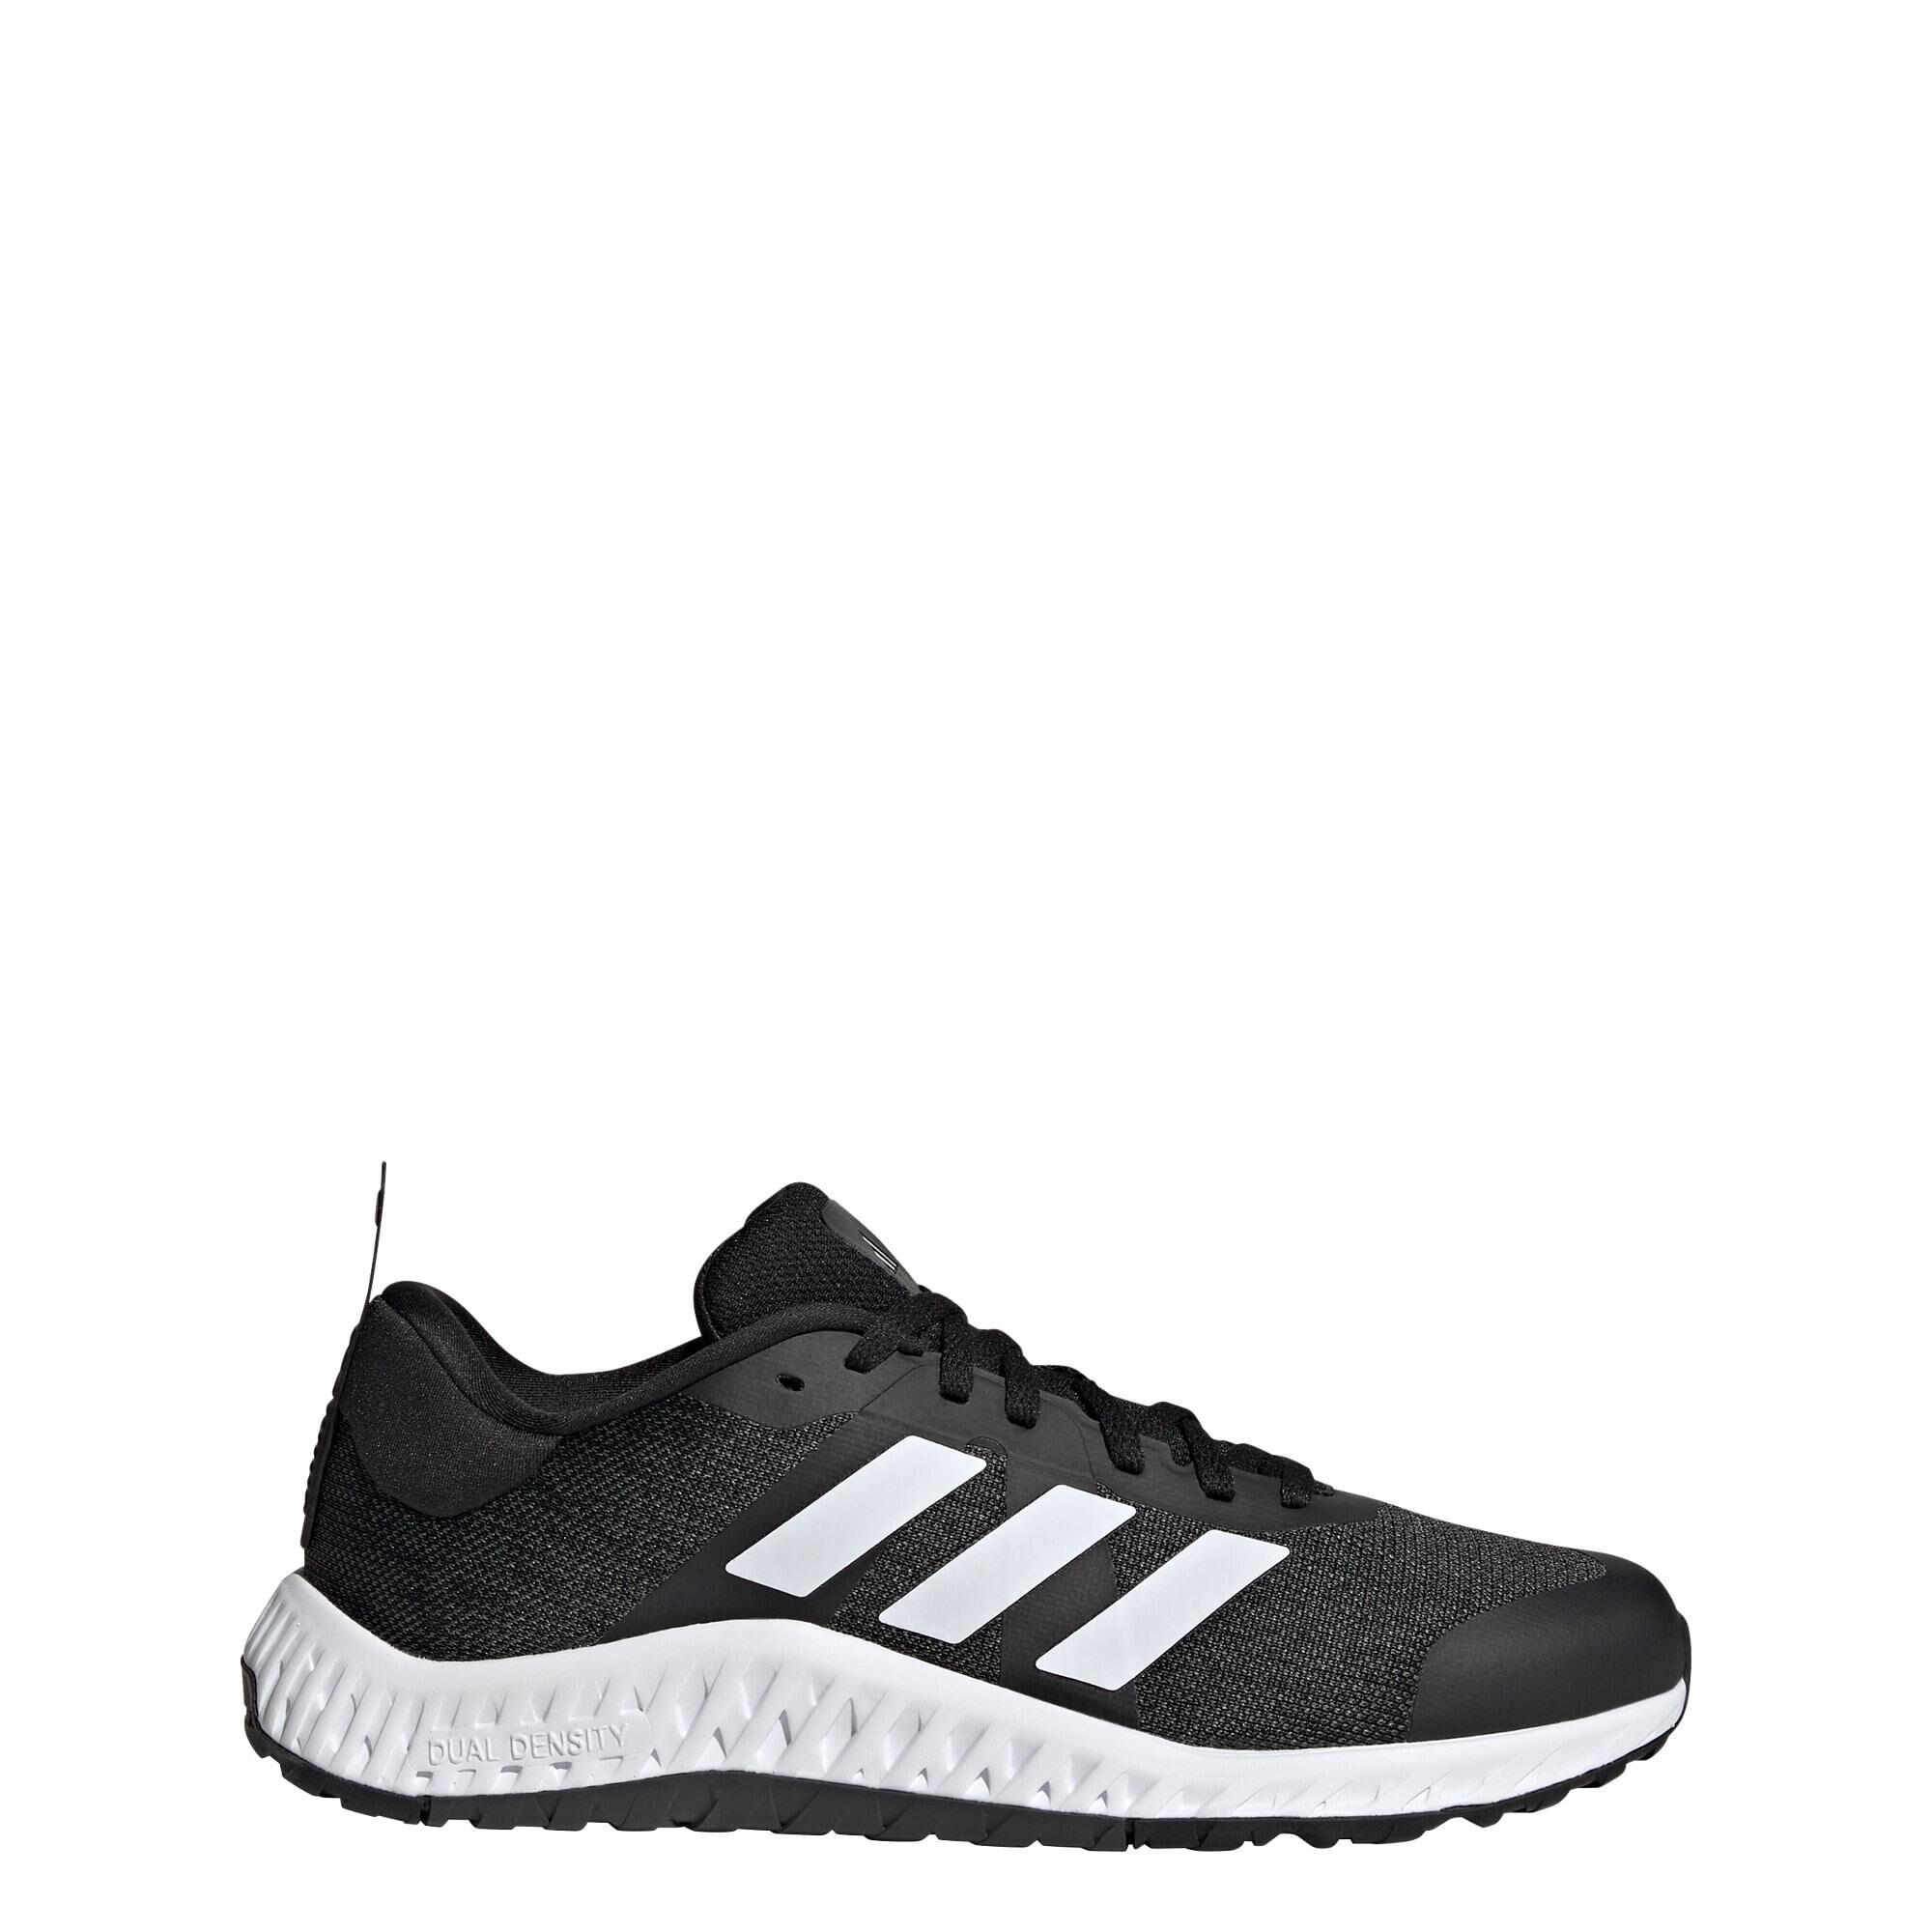 ADIDAS Everyset Trainer Shoes